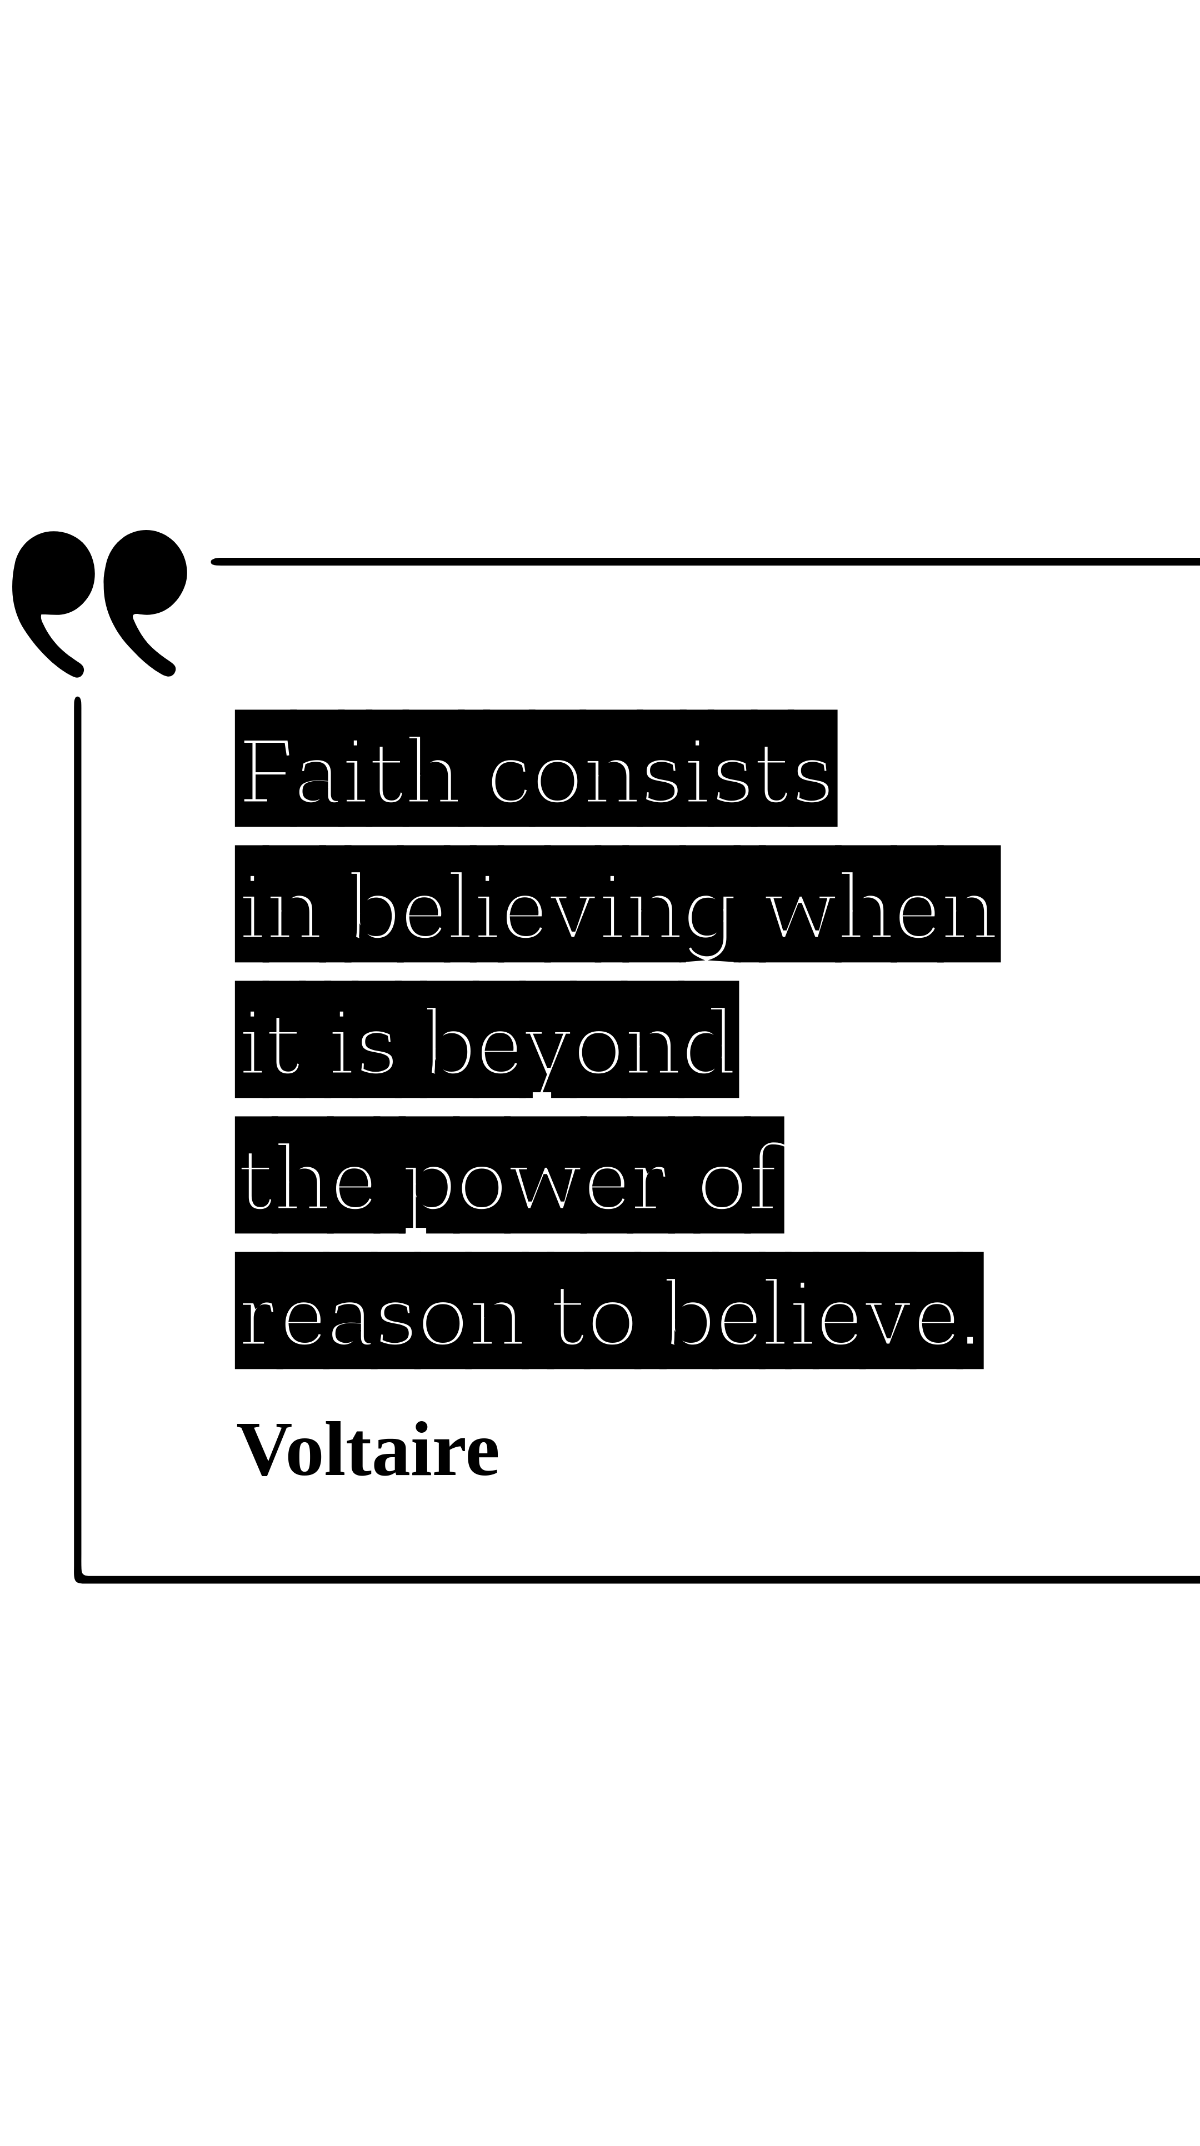 Voltaire - Faith consists in believing when it is beyond the power of reason to believe. Template